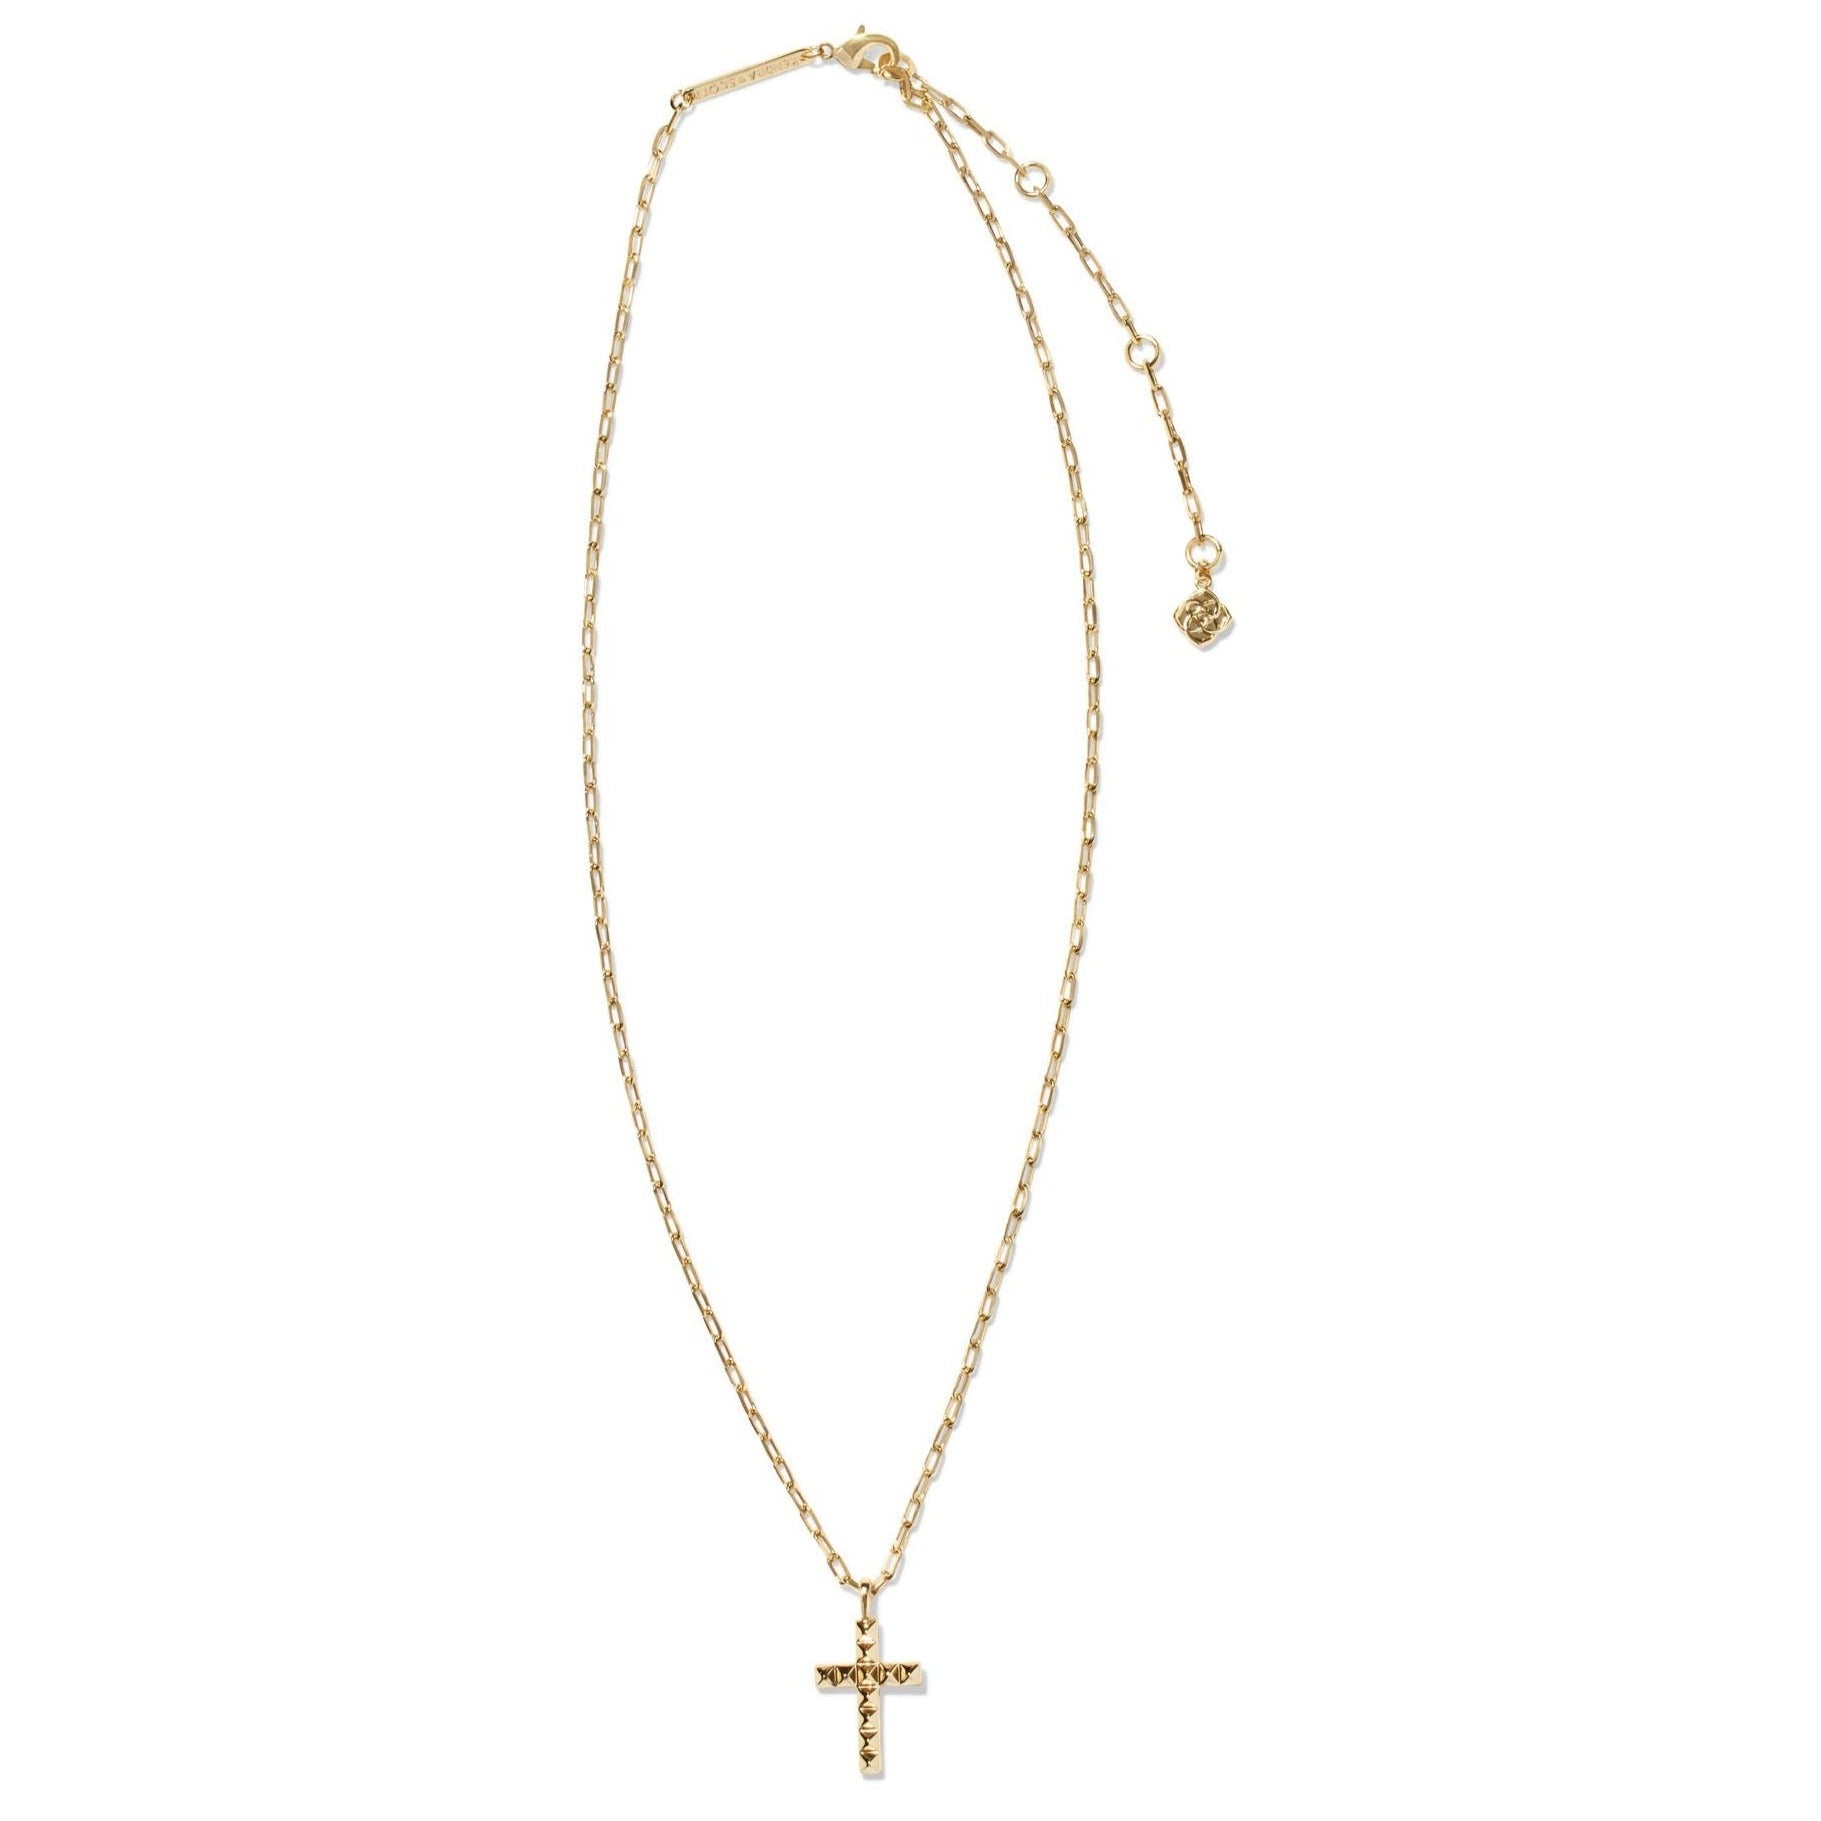 Kendra Scott | Jada Cross Short Pendant Necklace in Gold - Giddy Up Glamour Boutique